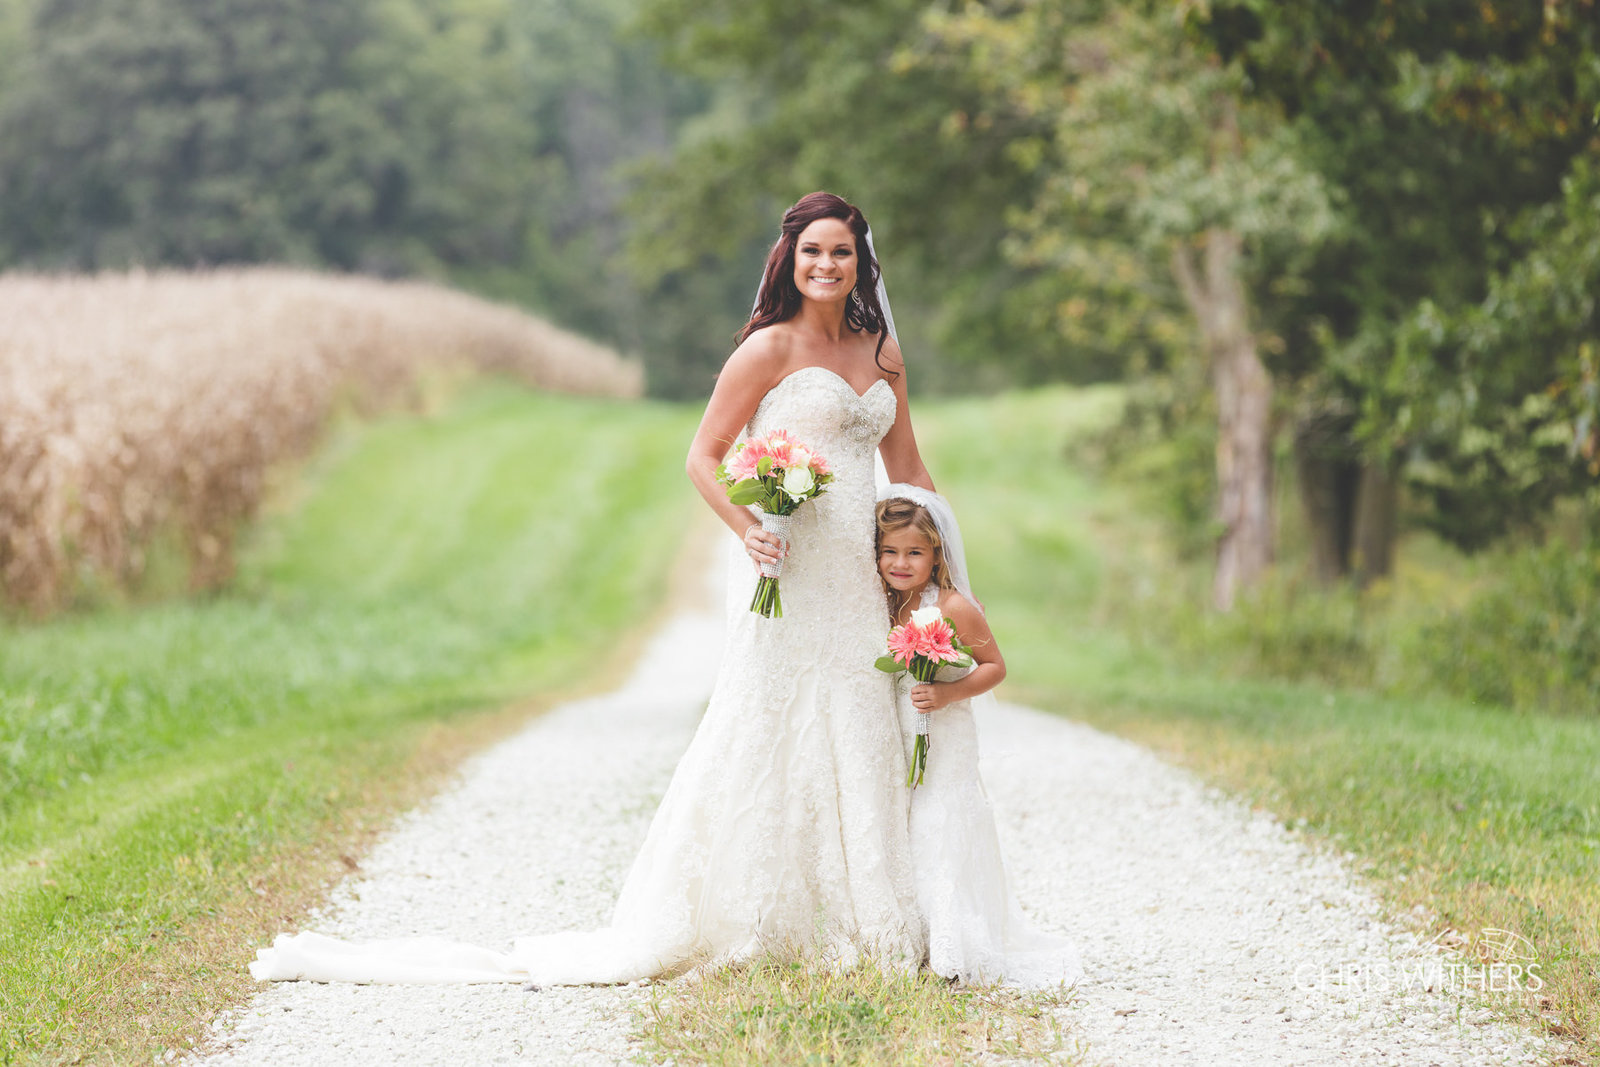 Springfield Illinois Wedding Photographer - Chris Withers Photography (107 of 159)